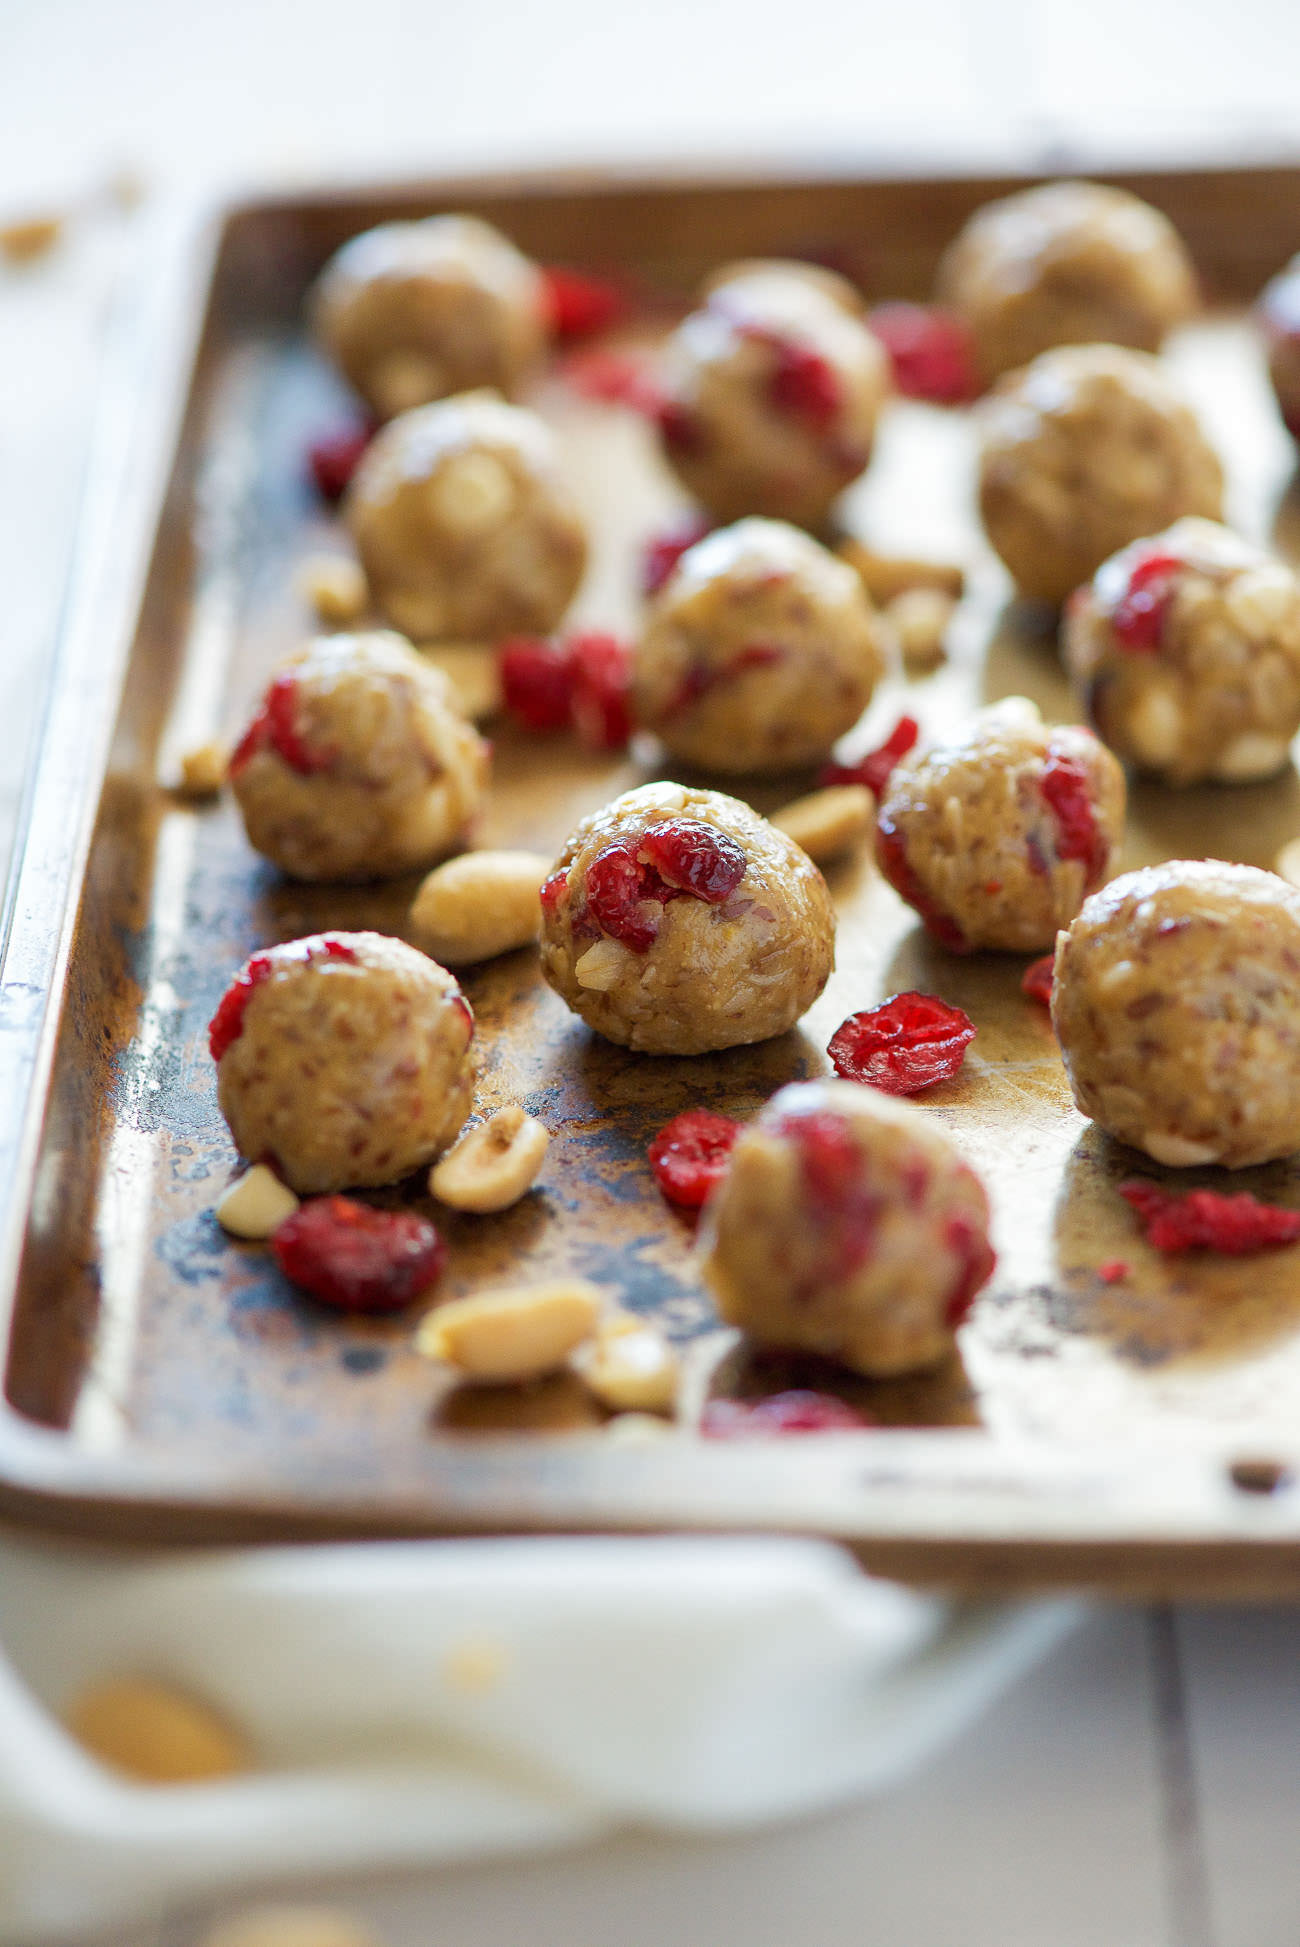 Cranberry White Chocolate Energy Bites are highly addicting and could pass as a healthy dessert! Tart cranberries mixed with white chocolate, oats, cinnamon and honey for a wholesome snack!